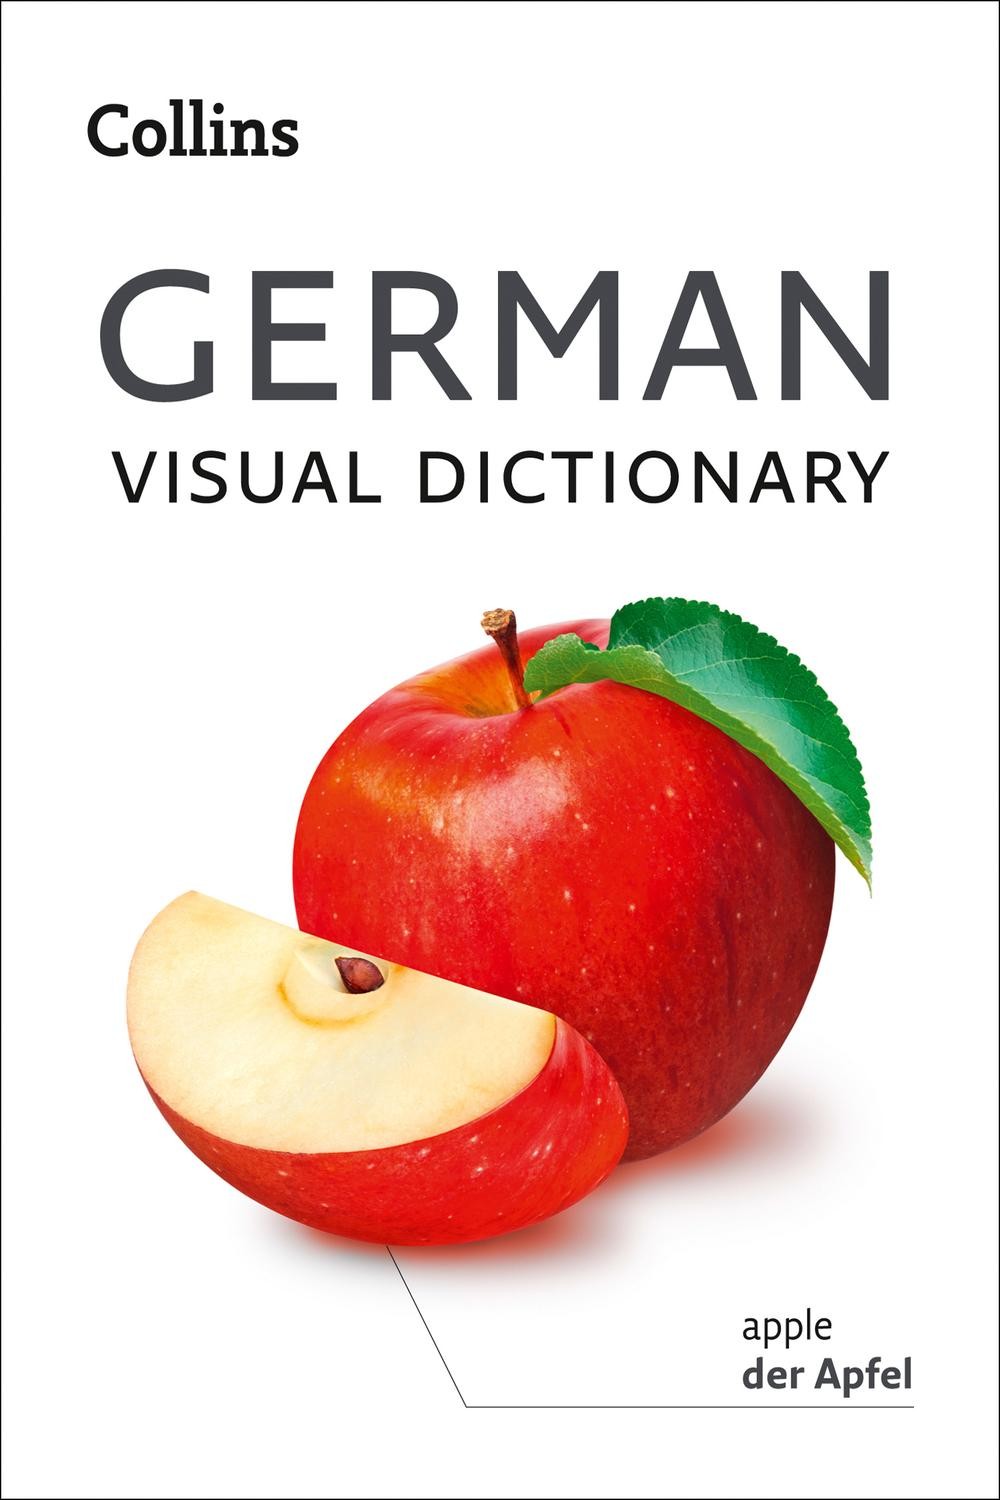 German Visual Dictionary: A photo guide to everyday words and phrases in German (Collins Visual Dictionary)